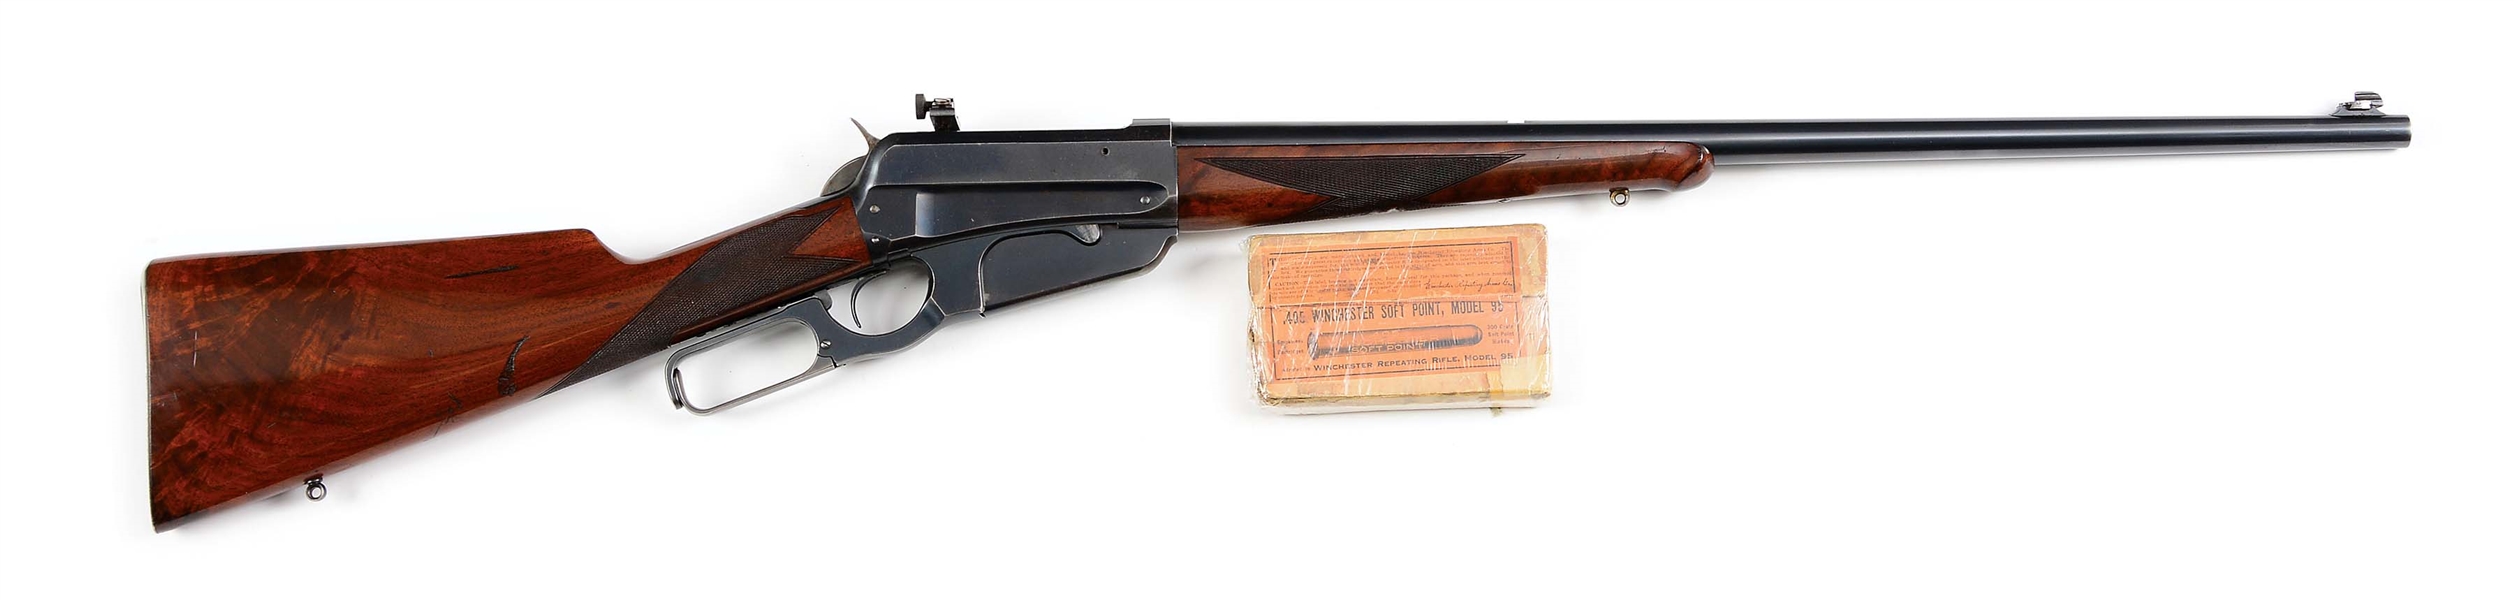 (C) DELUXE WINCHESTER .405 MODEL 1895 LEVER ACTION RIFLE (1909).